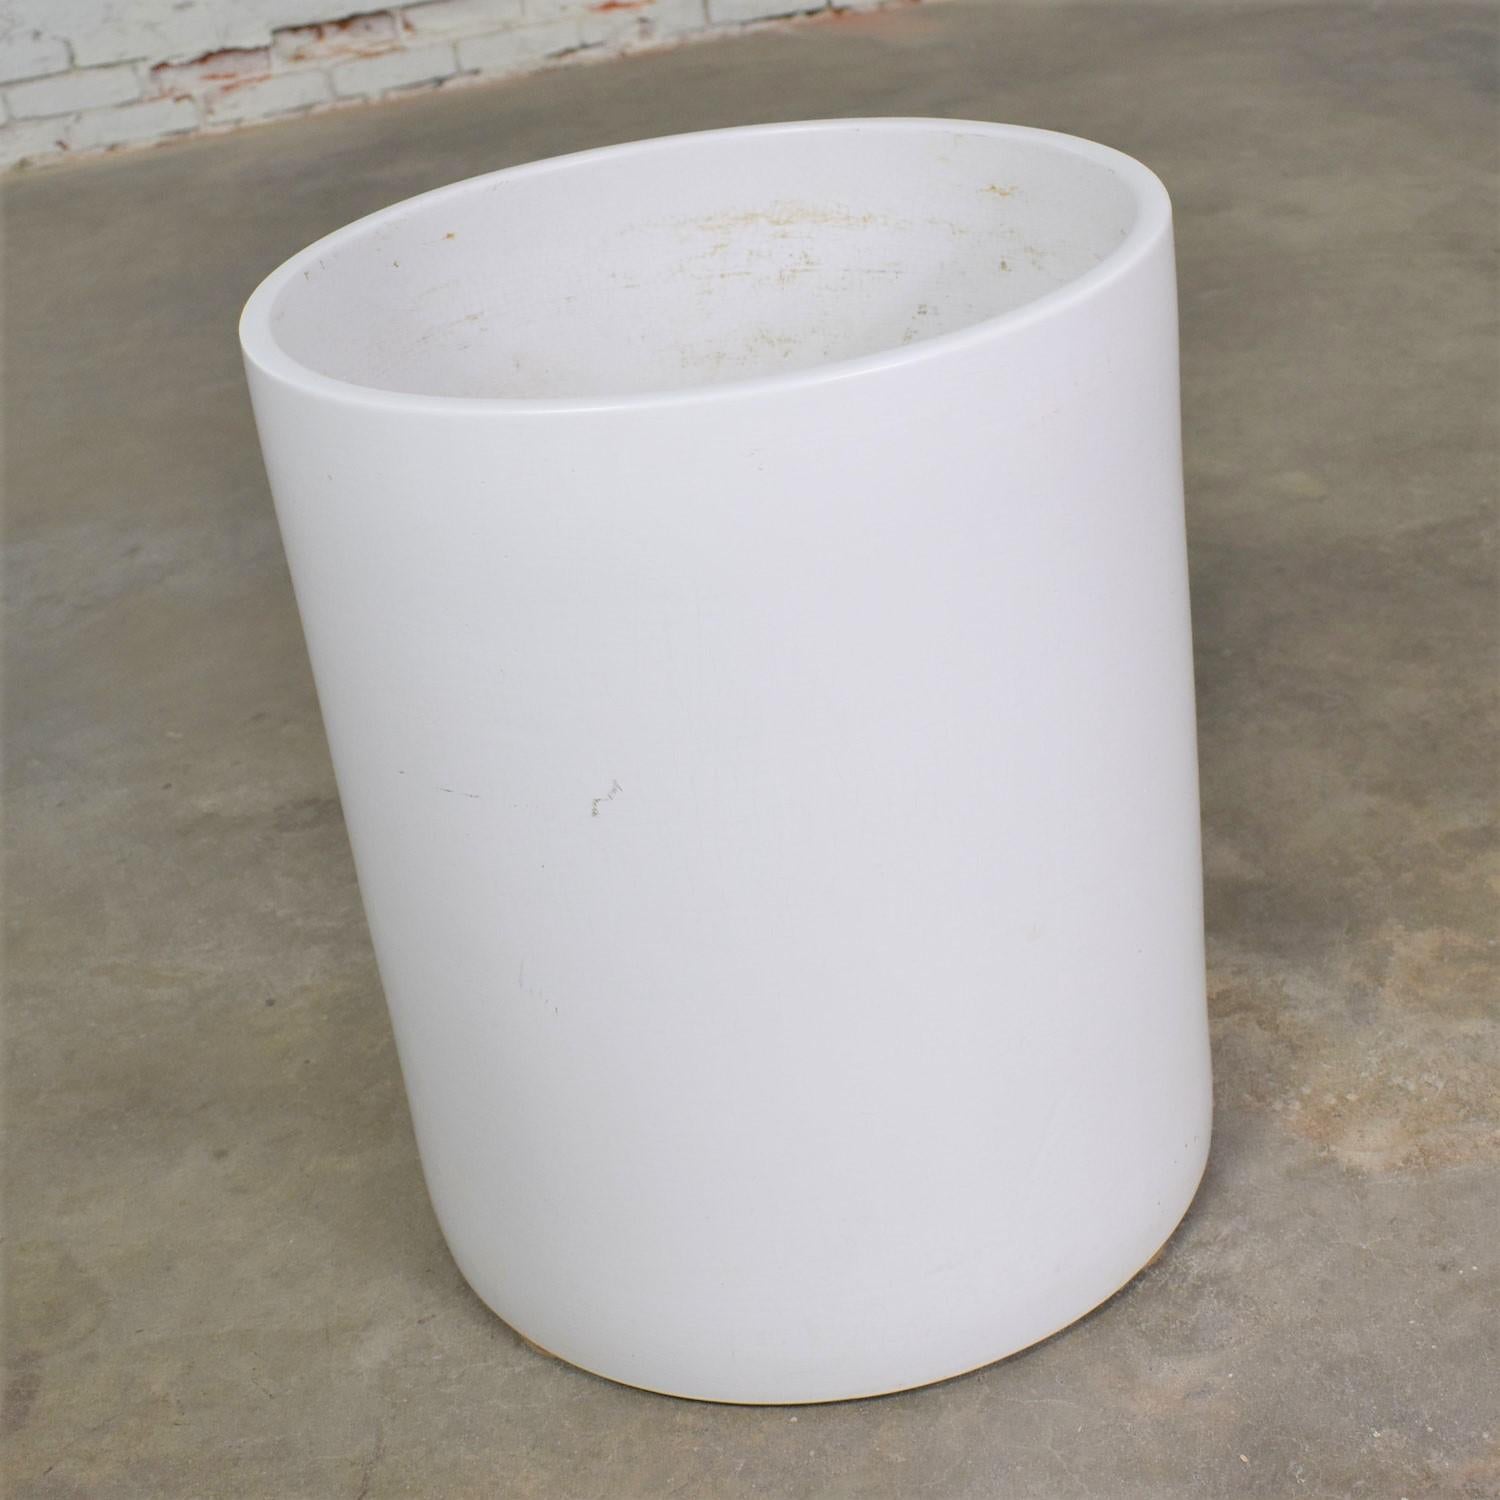 Iconic vintage Mid-Century Modern monumental white cylindrical pot by Architectural Pottery of California. Mark is on the inside bottom. It is in fabulous vintage condition with no chips or cracks that we have encountered. It was filled with soil